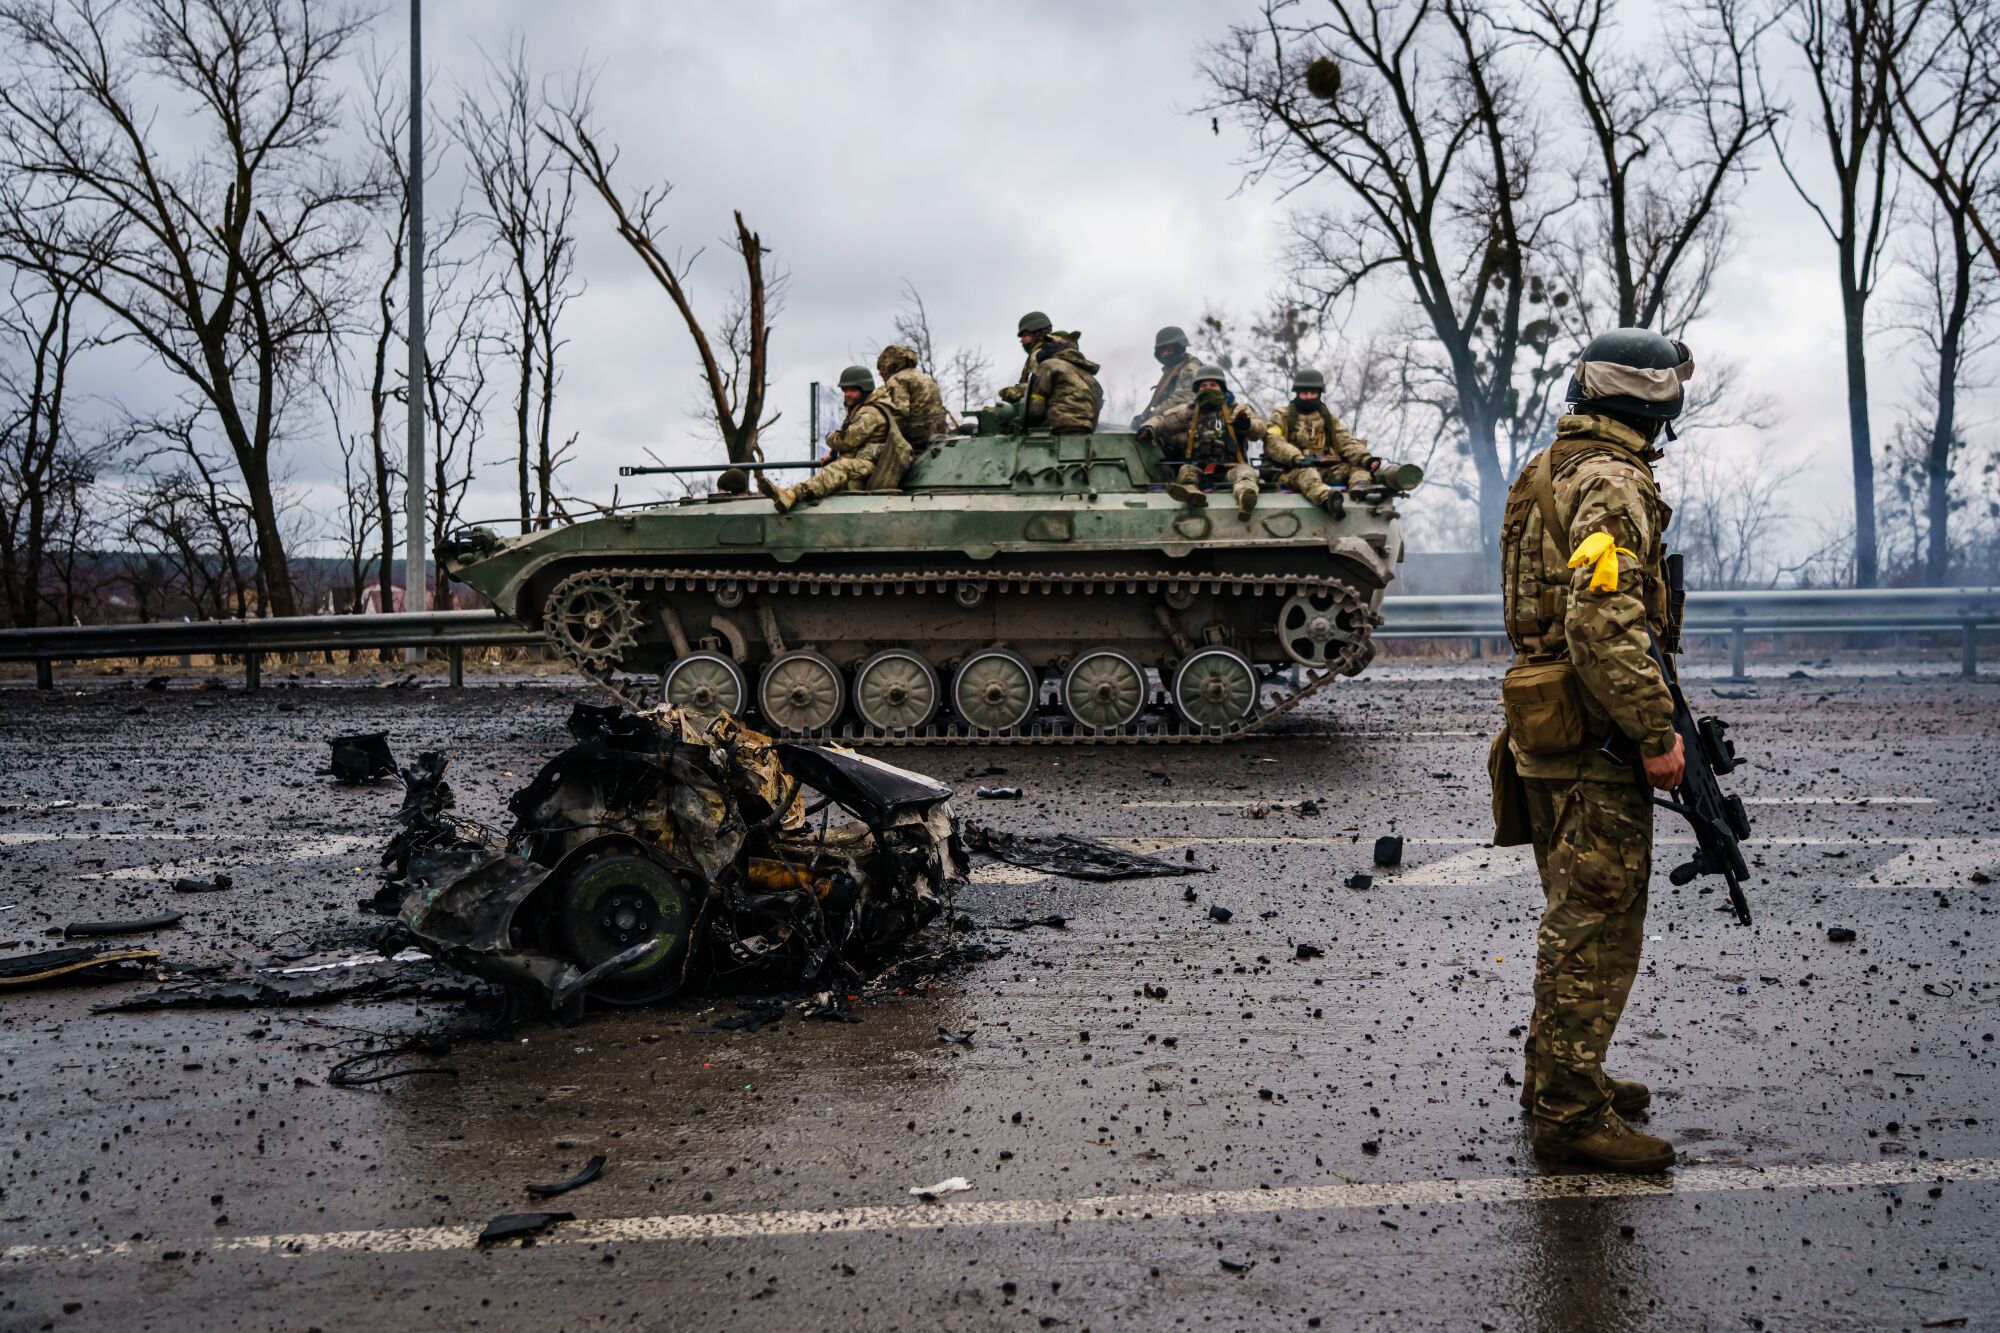 Uniformed troops ride a military vehicle on a debris-littered road